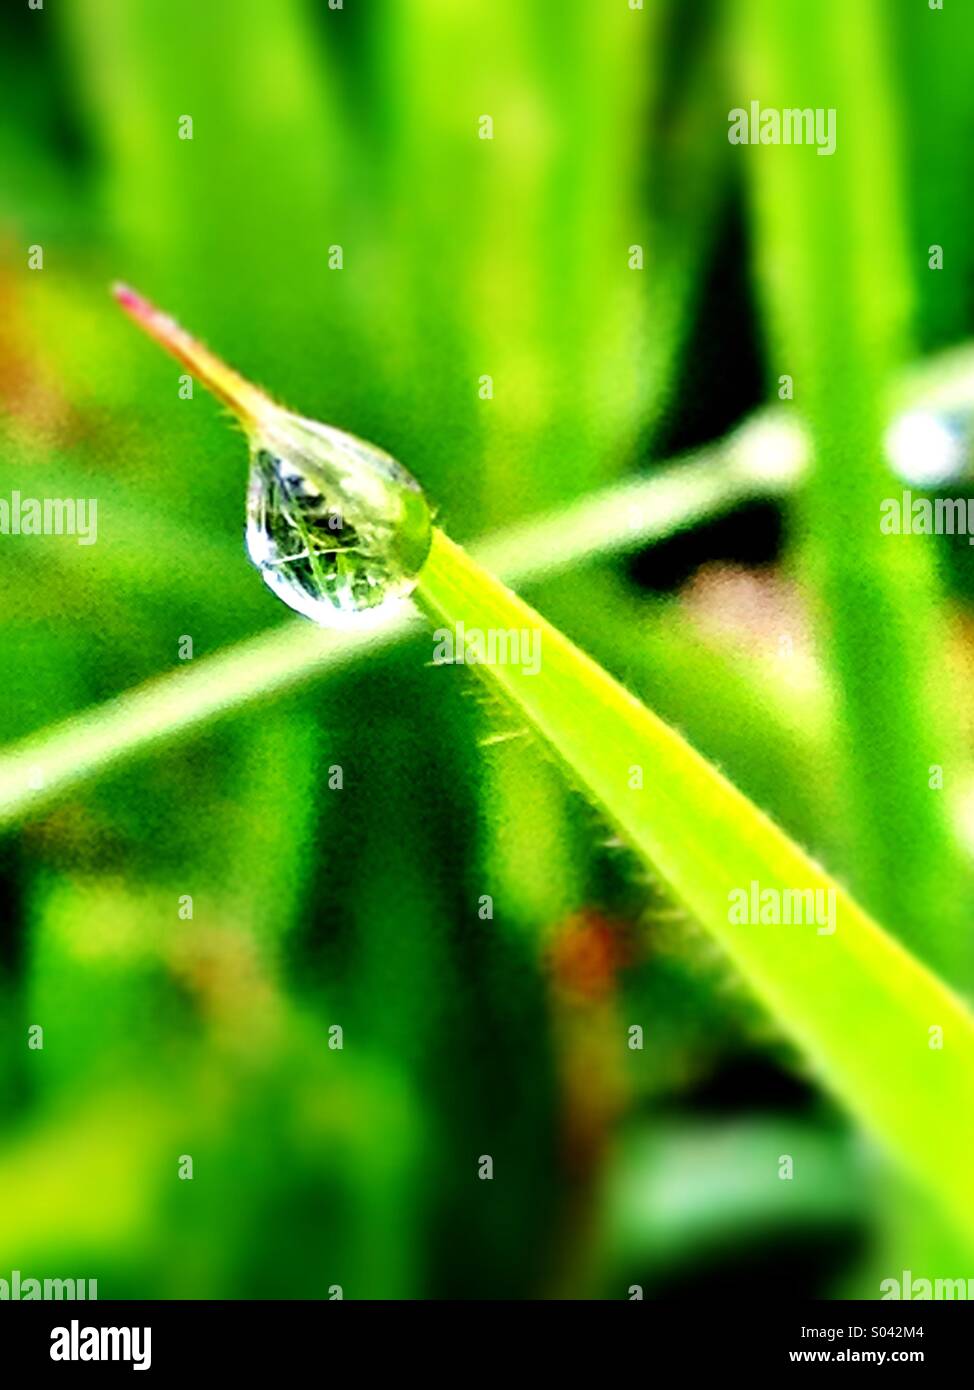 Dewdrop on blade of grass Stock Photo